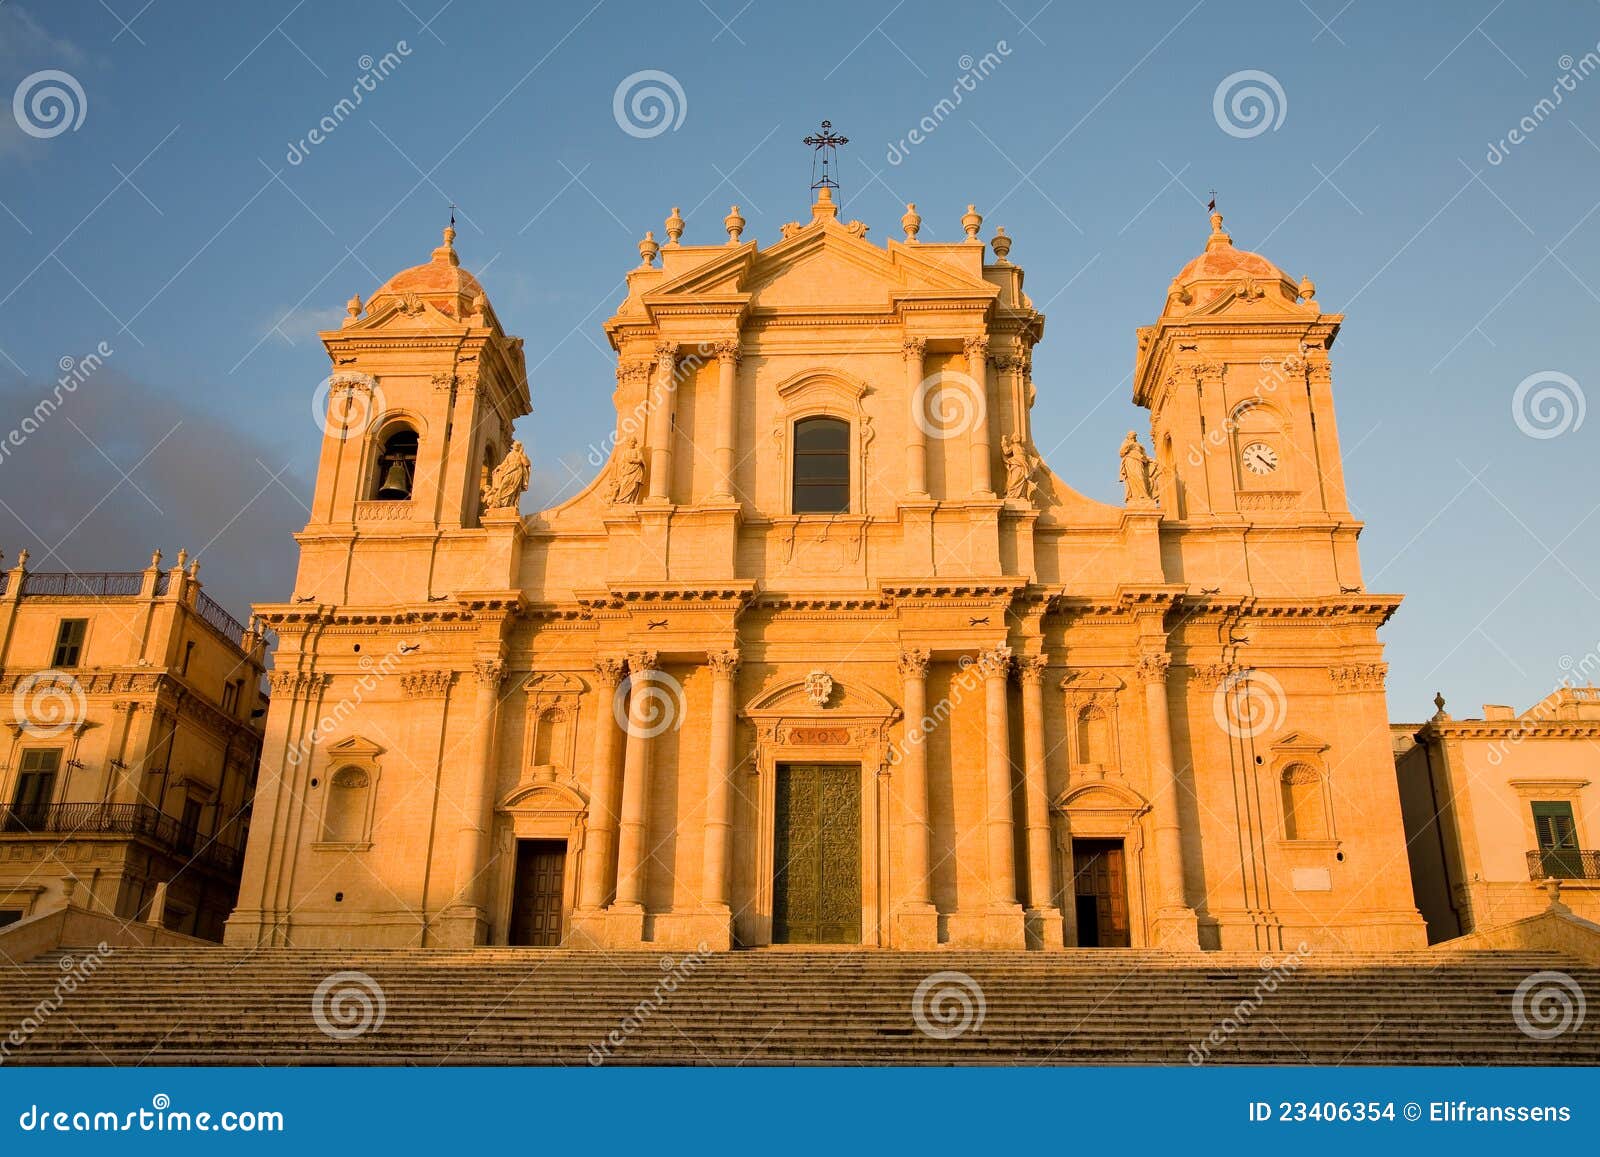 cathedral of noto, sicily